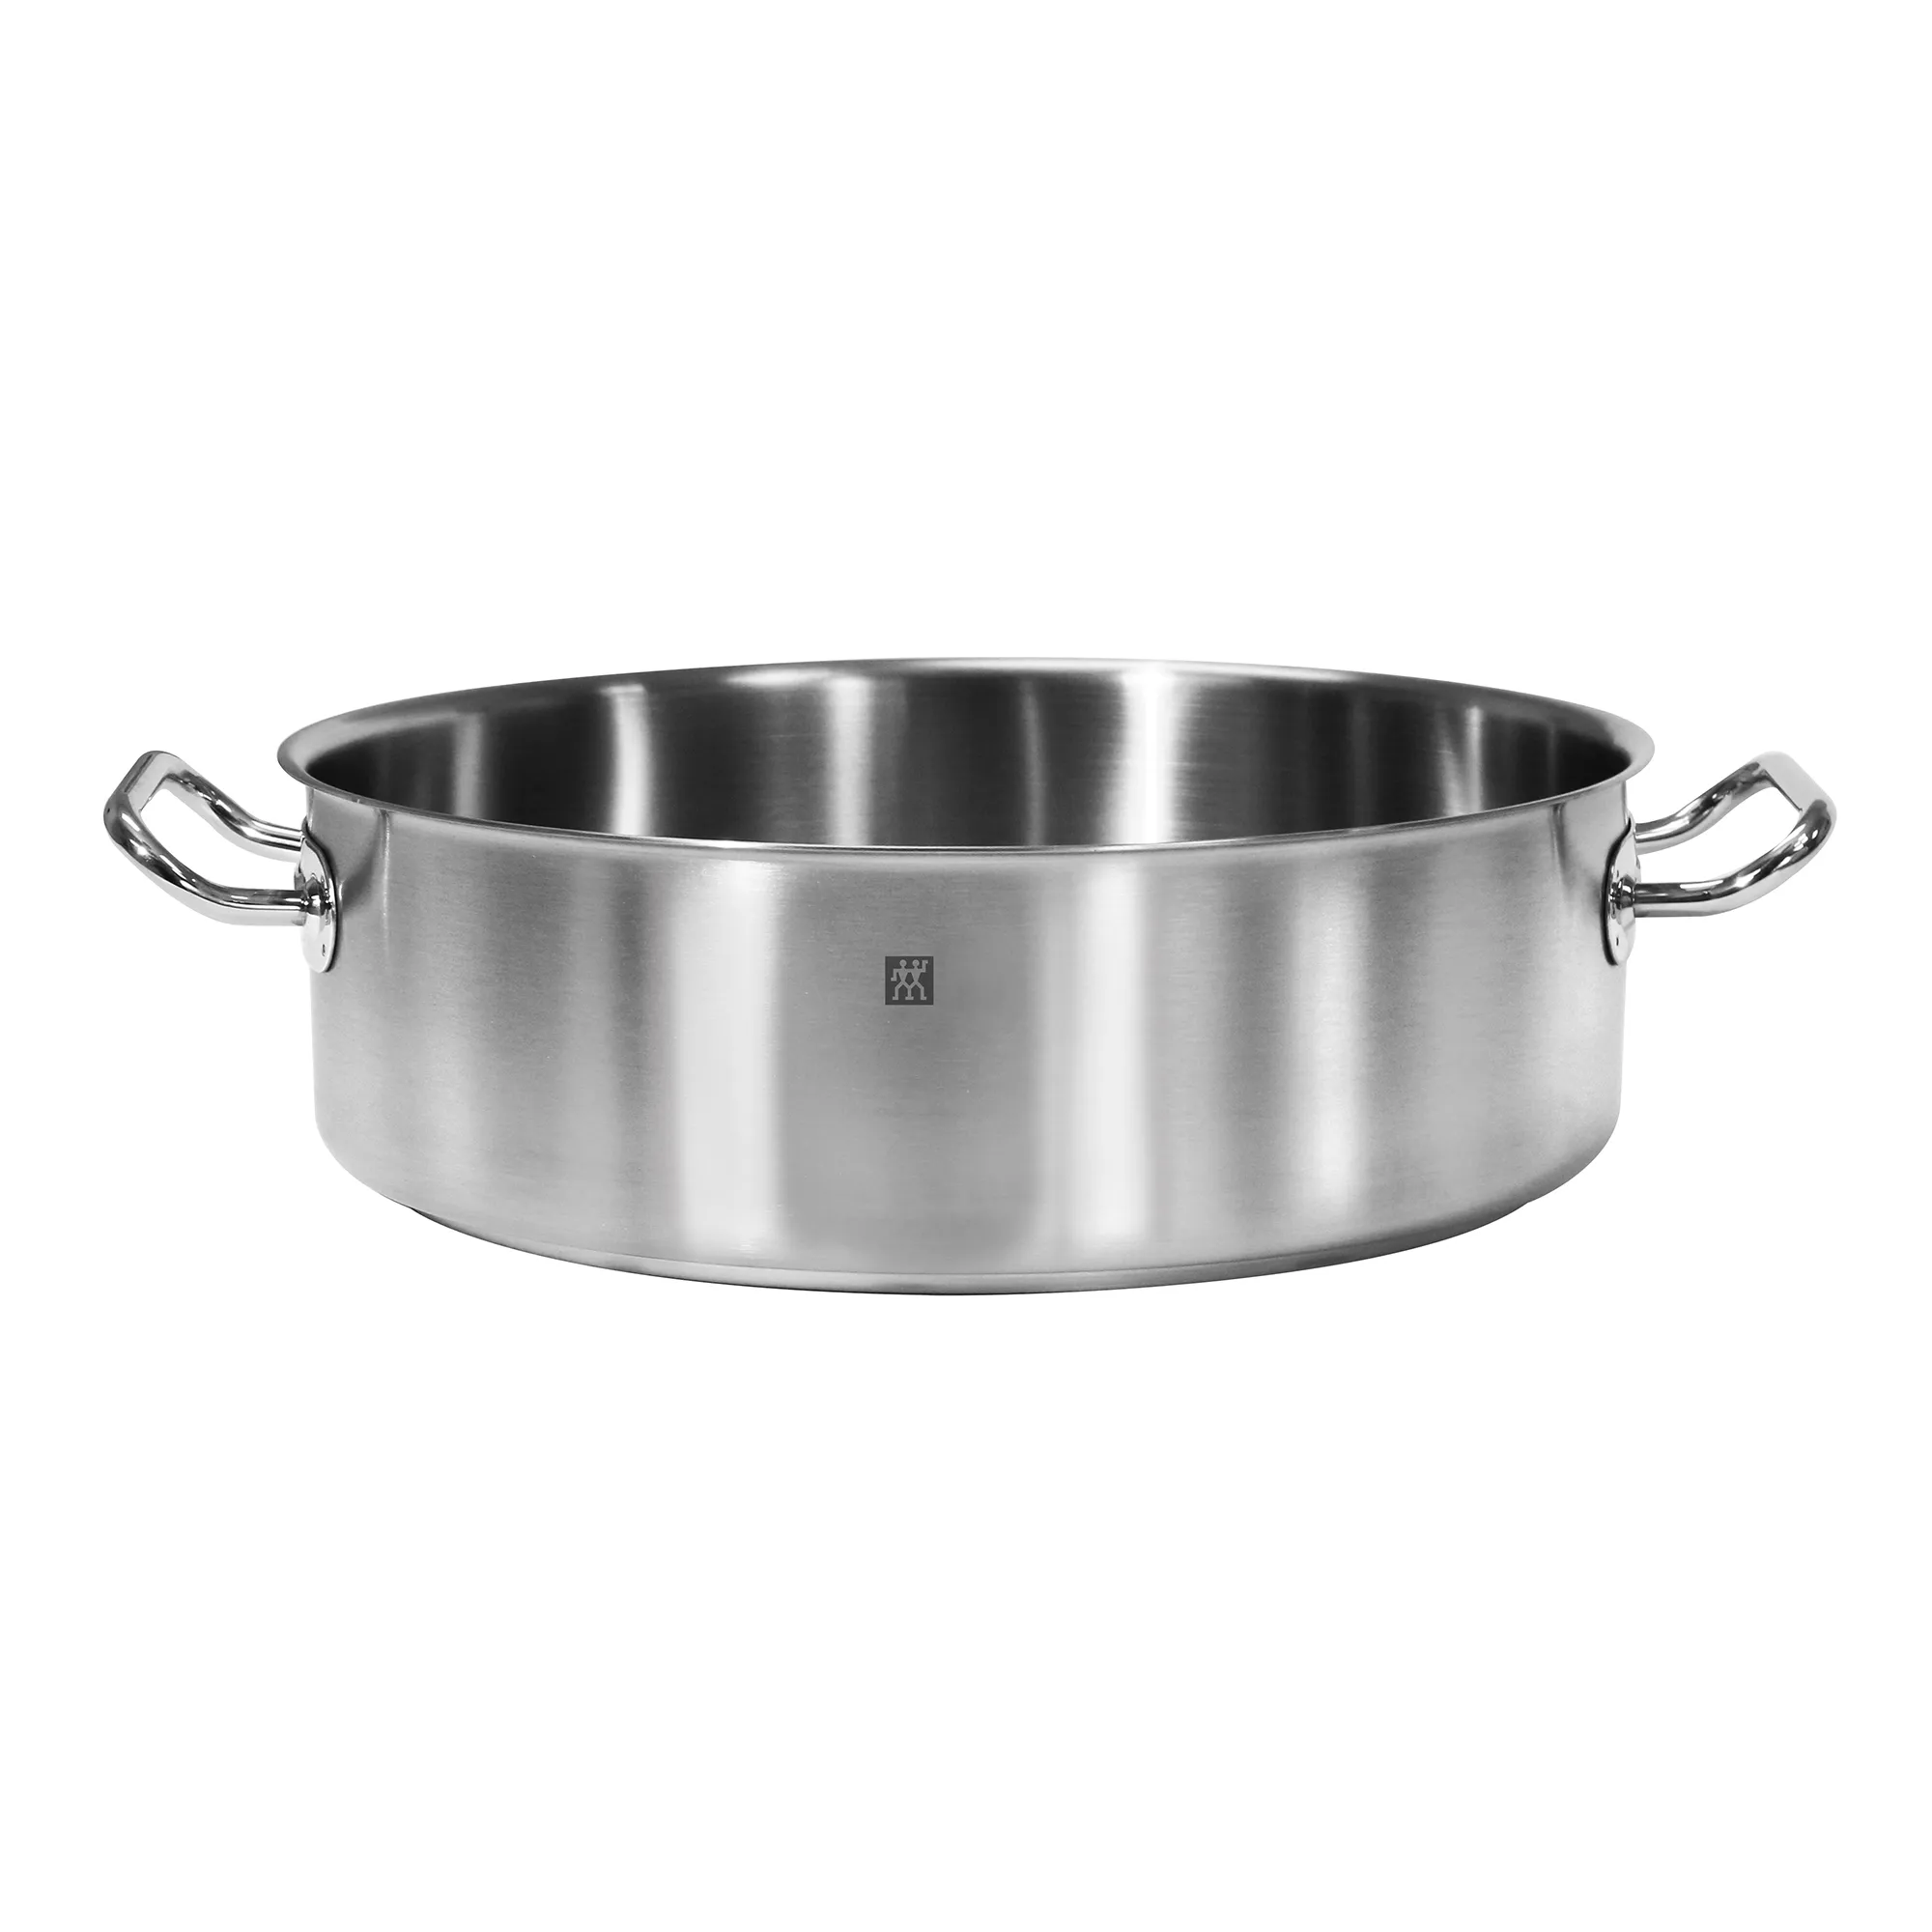 https://www.homethreads.com/files/zwilling/65107-360-zwilling-commercial-12-qt-stainless-steel-rondeau-pan-without-a-lid.webp